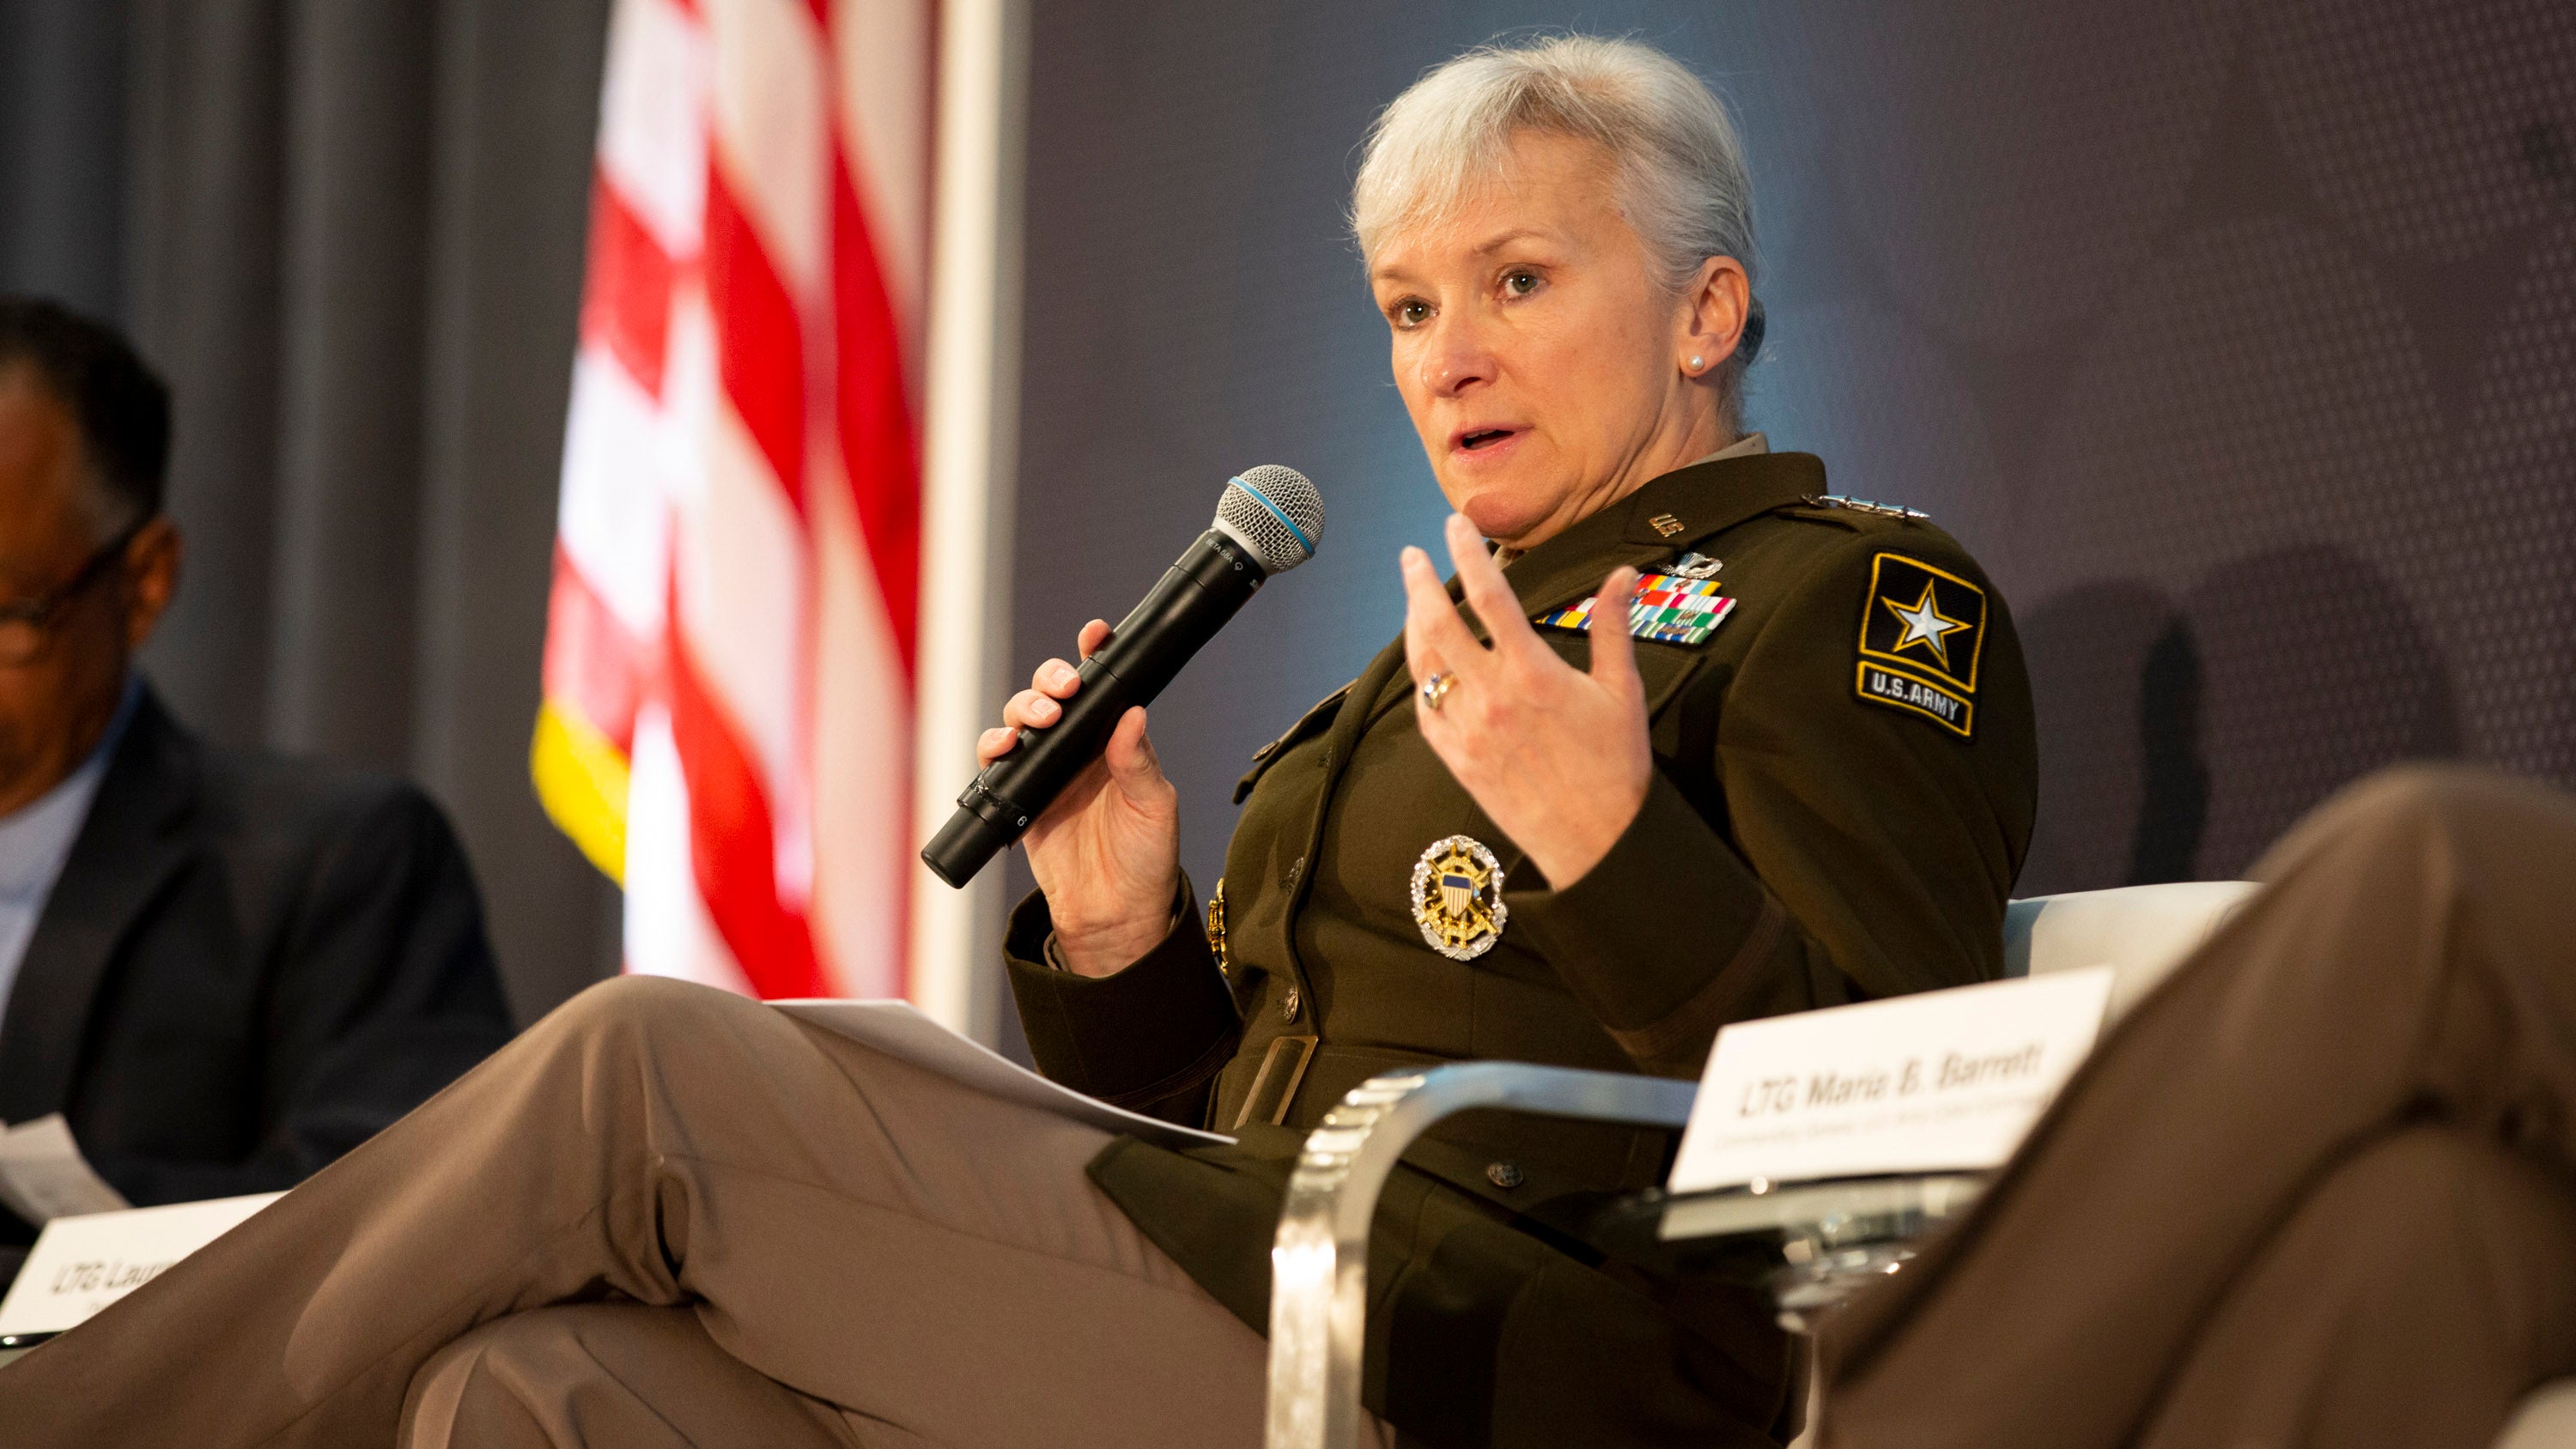 Lt. Gen. Laura Potter, Deputy Chief of Staff, G-2, speaks during the AUSA Contemporary Military Forum: Evolution of Cyber and Information Advantage at AUSA 2022 Annual Meeting in Washington, D.C., Wednesday, Oct. 12, 2022. (Jen Milbrett for AUSA)